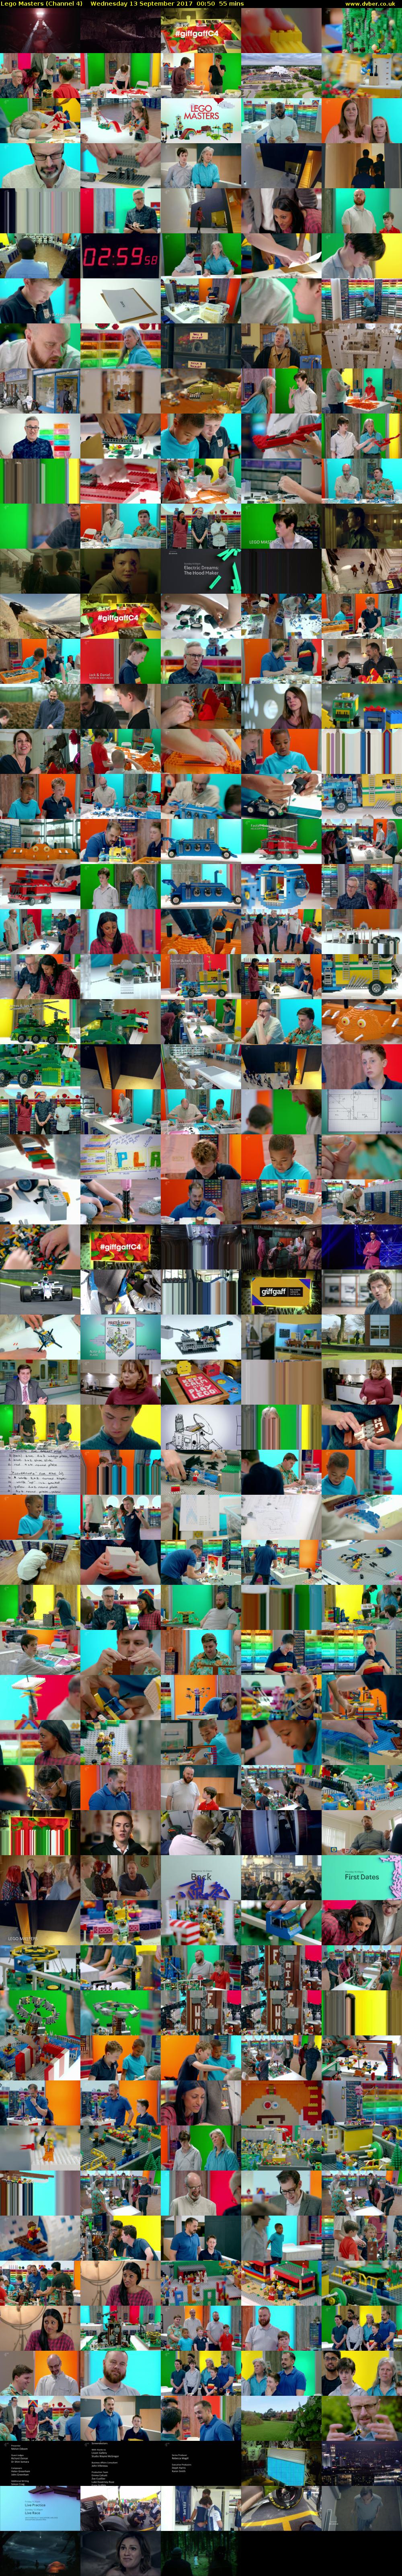 Lego Masters (Channel 4) Wednesday 13 September 2017 00:50 - 01:45